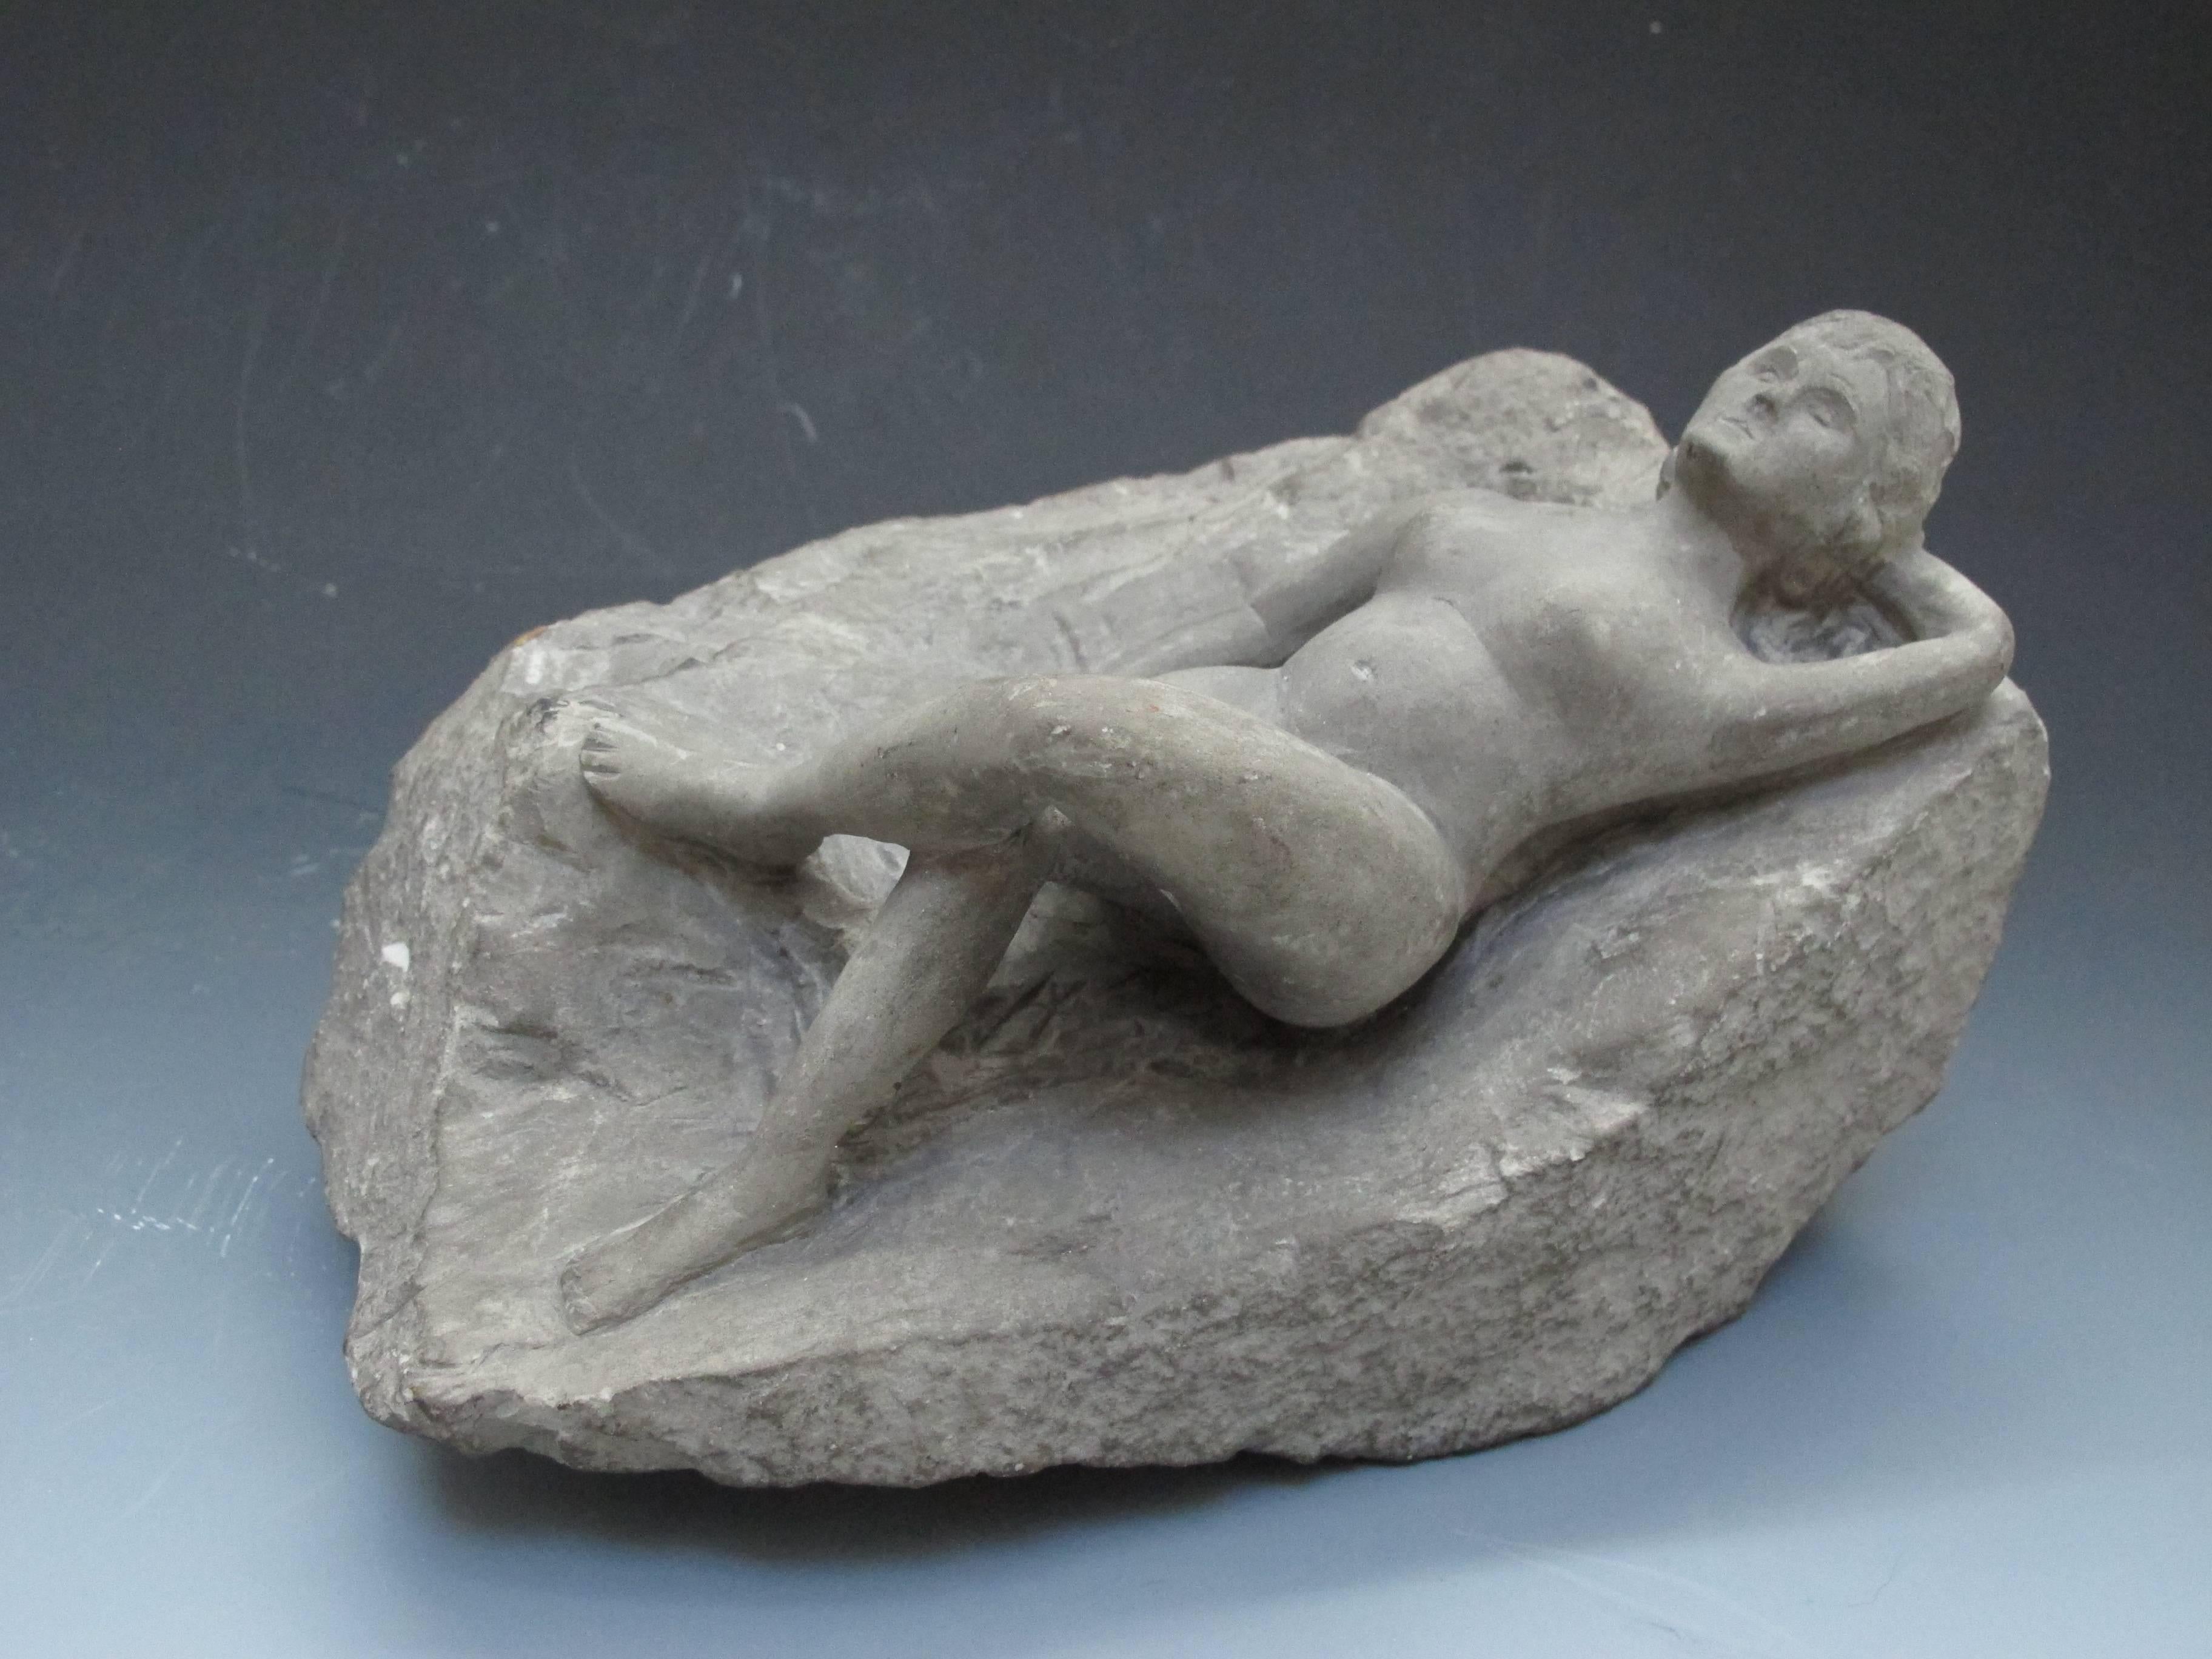 Finely carved reclining woman on rough stone by unknown carver.